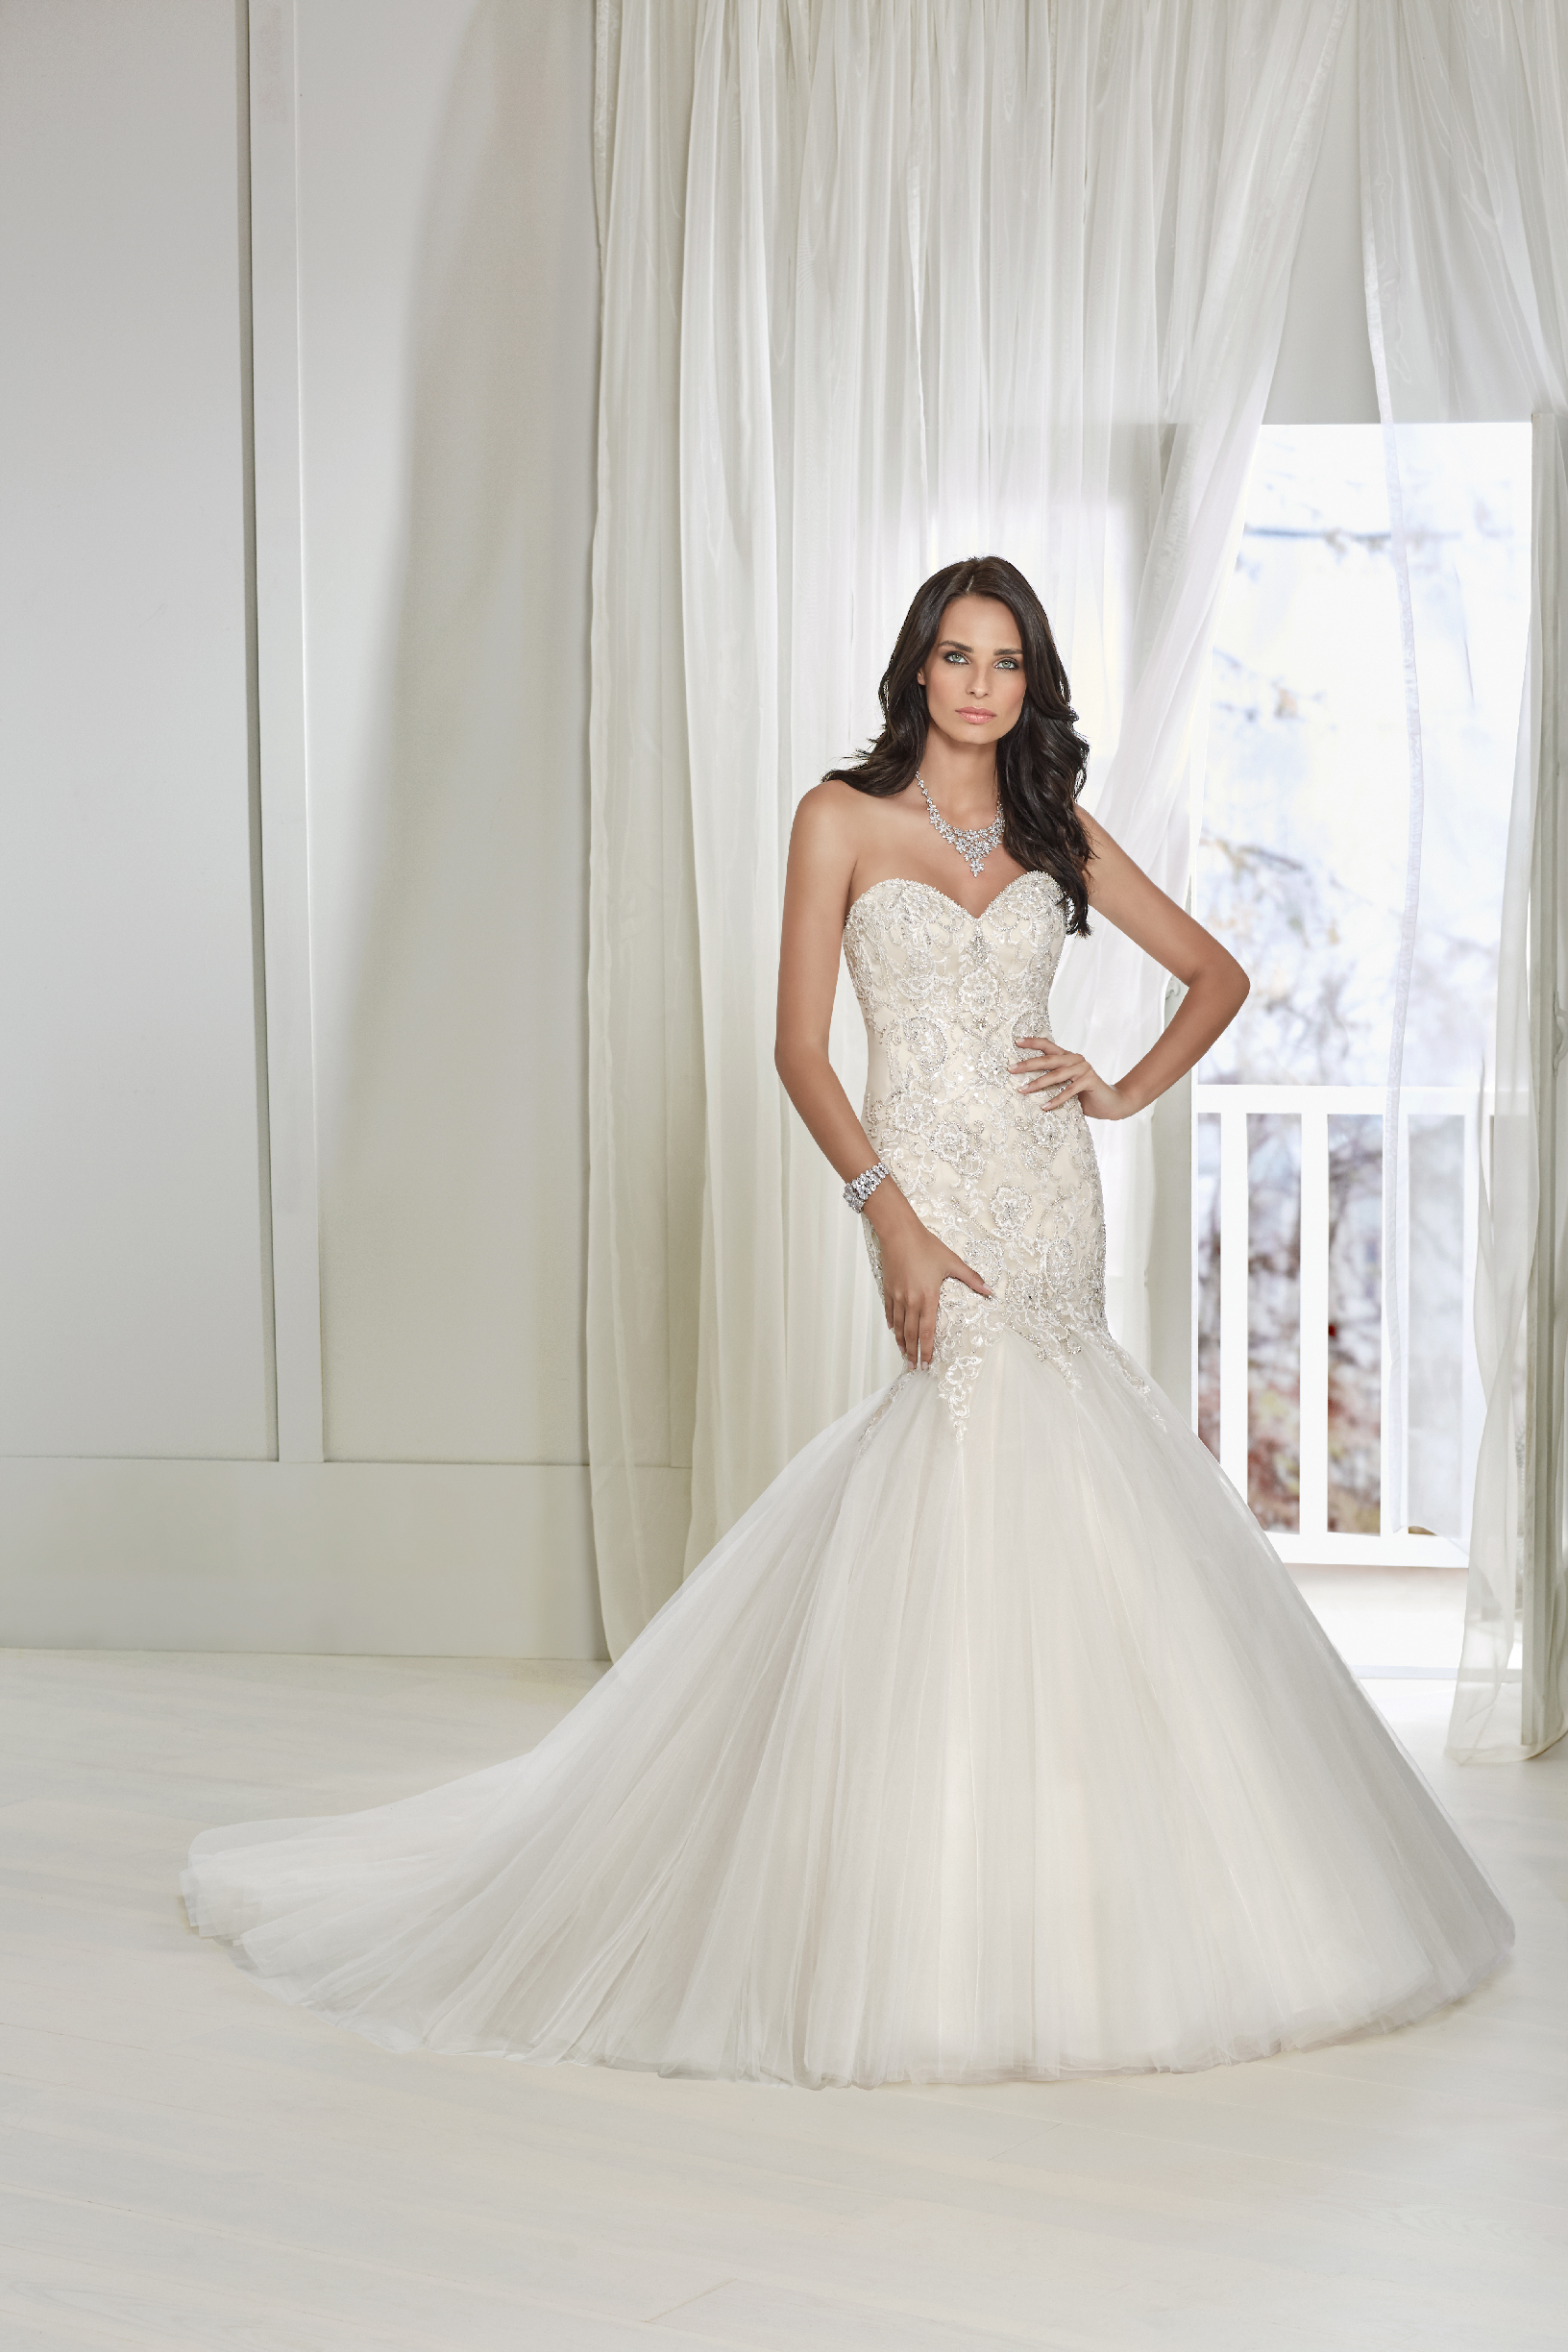 Model in Ronald Joyce wedding dress 18211 - a strapless fishtail gown with a beaded lace applique bodice and corset back that's perfect if you need a wedding dress quickly